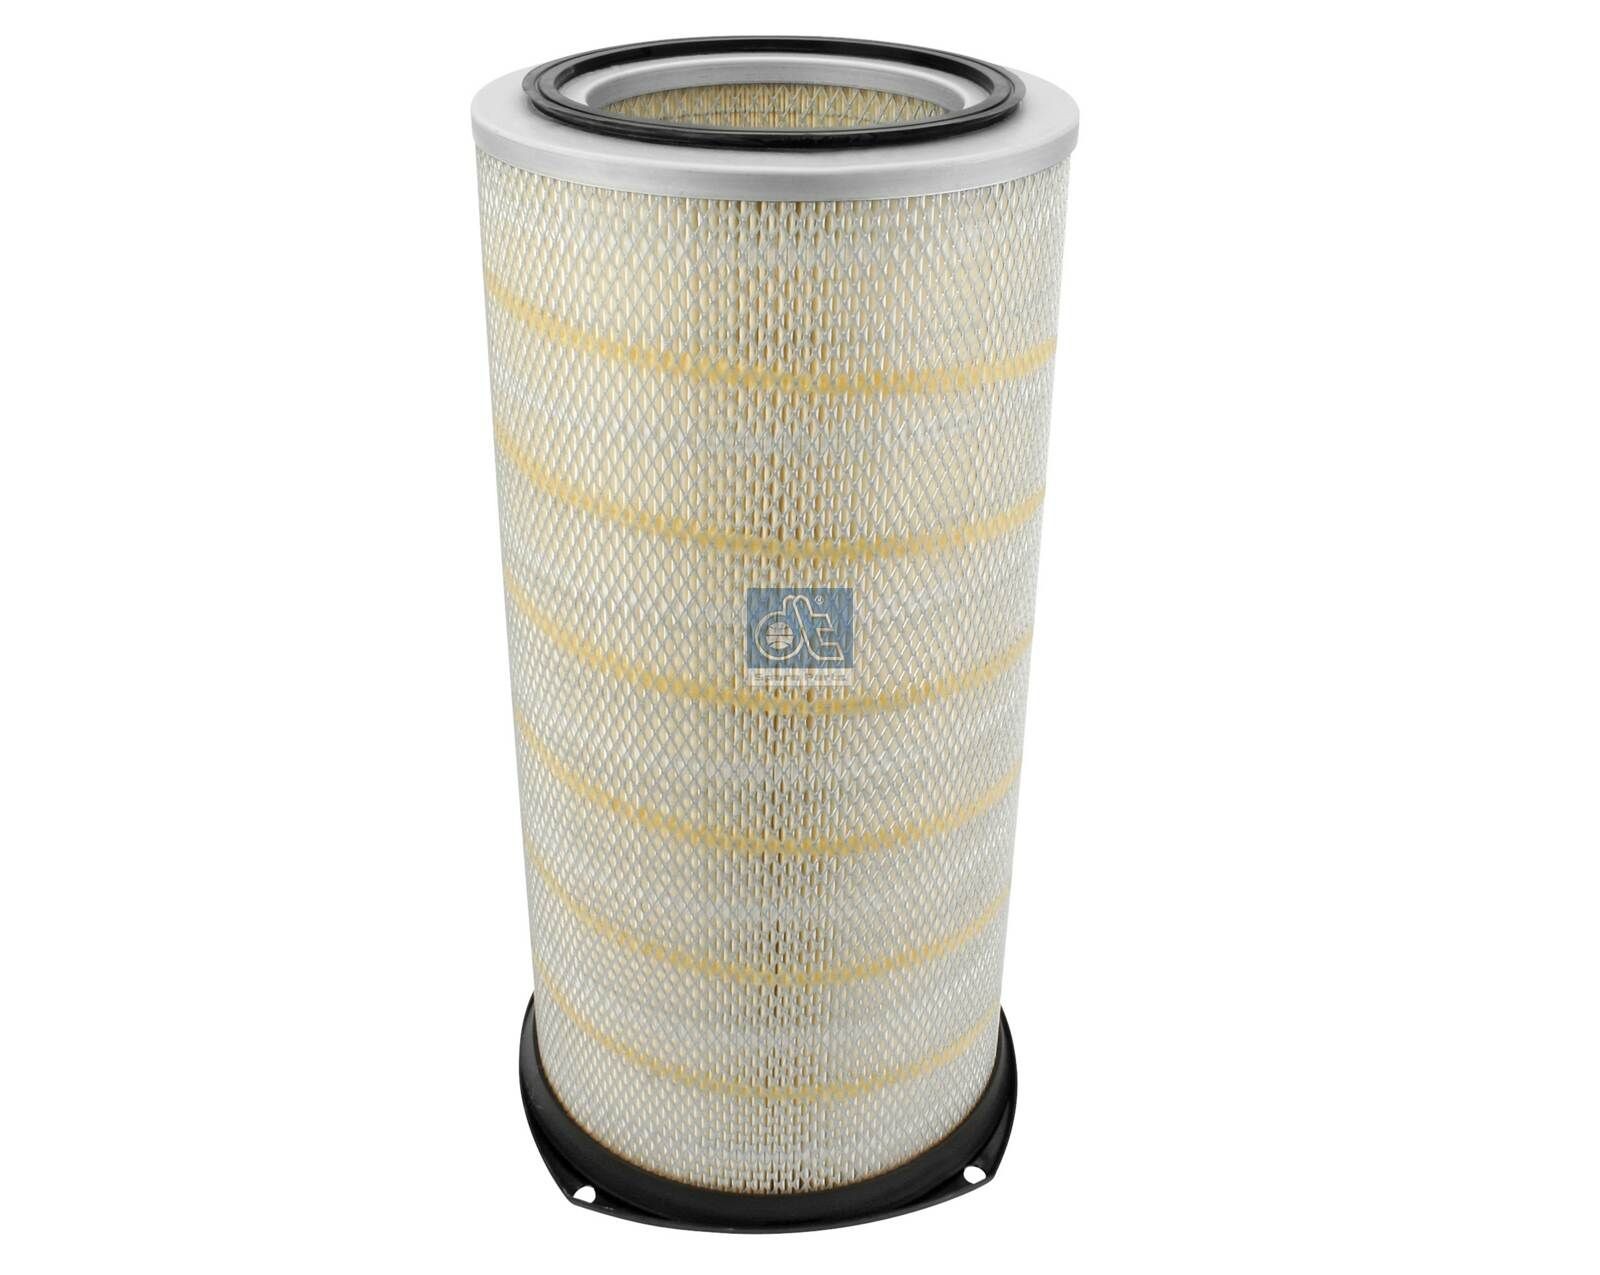 E562L DT Spare Parts 545mm, 259mm, Filter Insert Height: 545mm Engine air filter 2.14062 buy